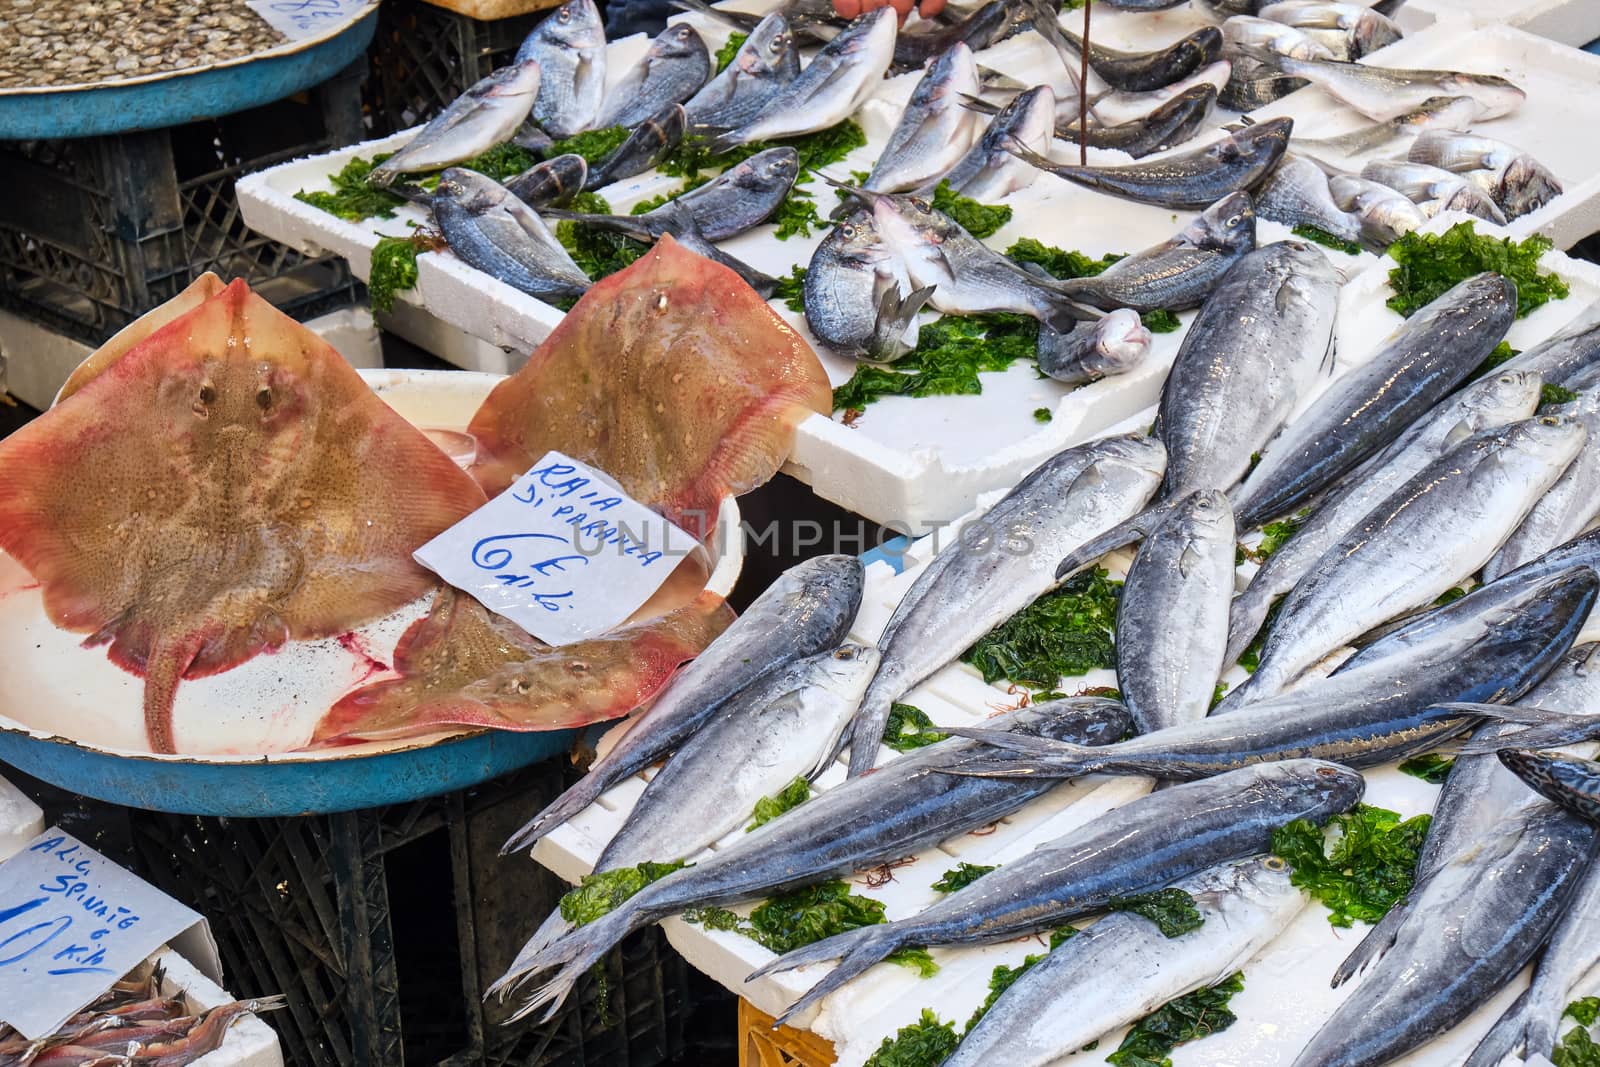 Different kinds of fish for sale at a market